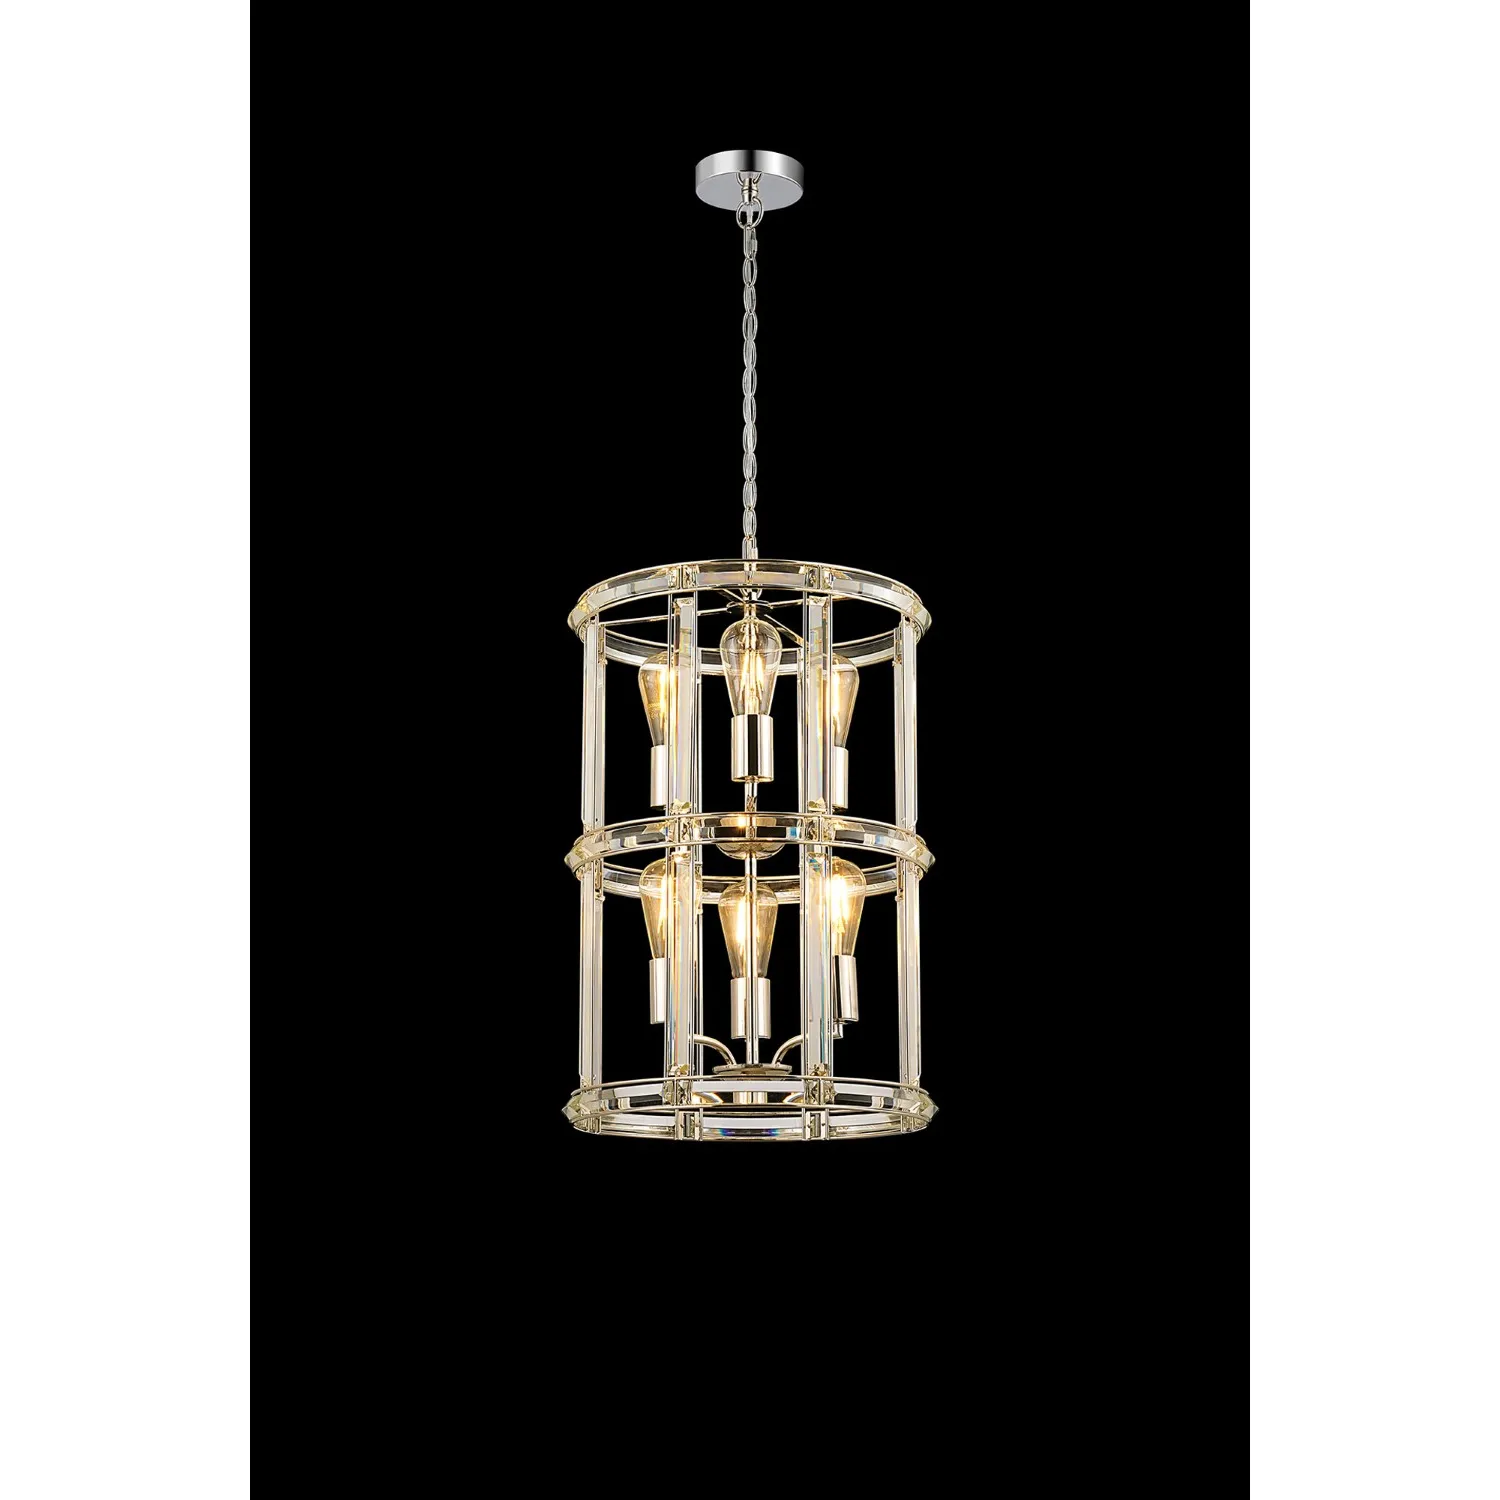 Woolwich Small Round Column Pendant, 6 Light E27, Polished Nickel